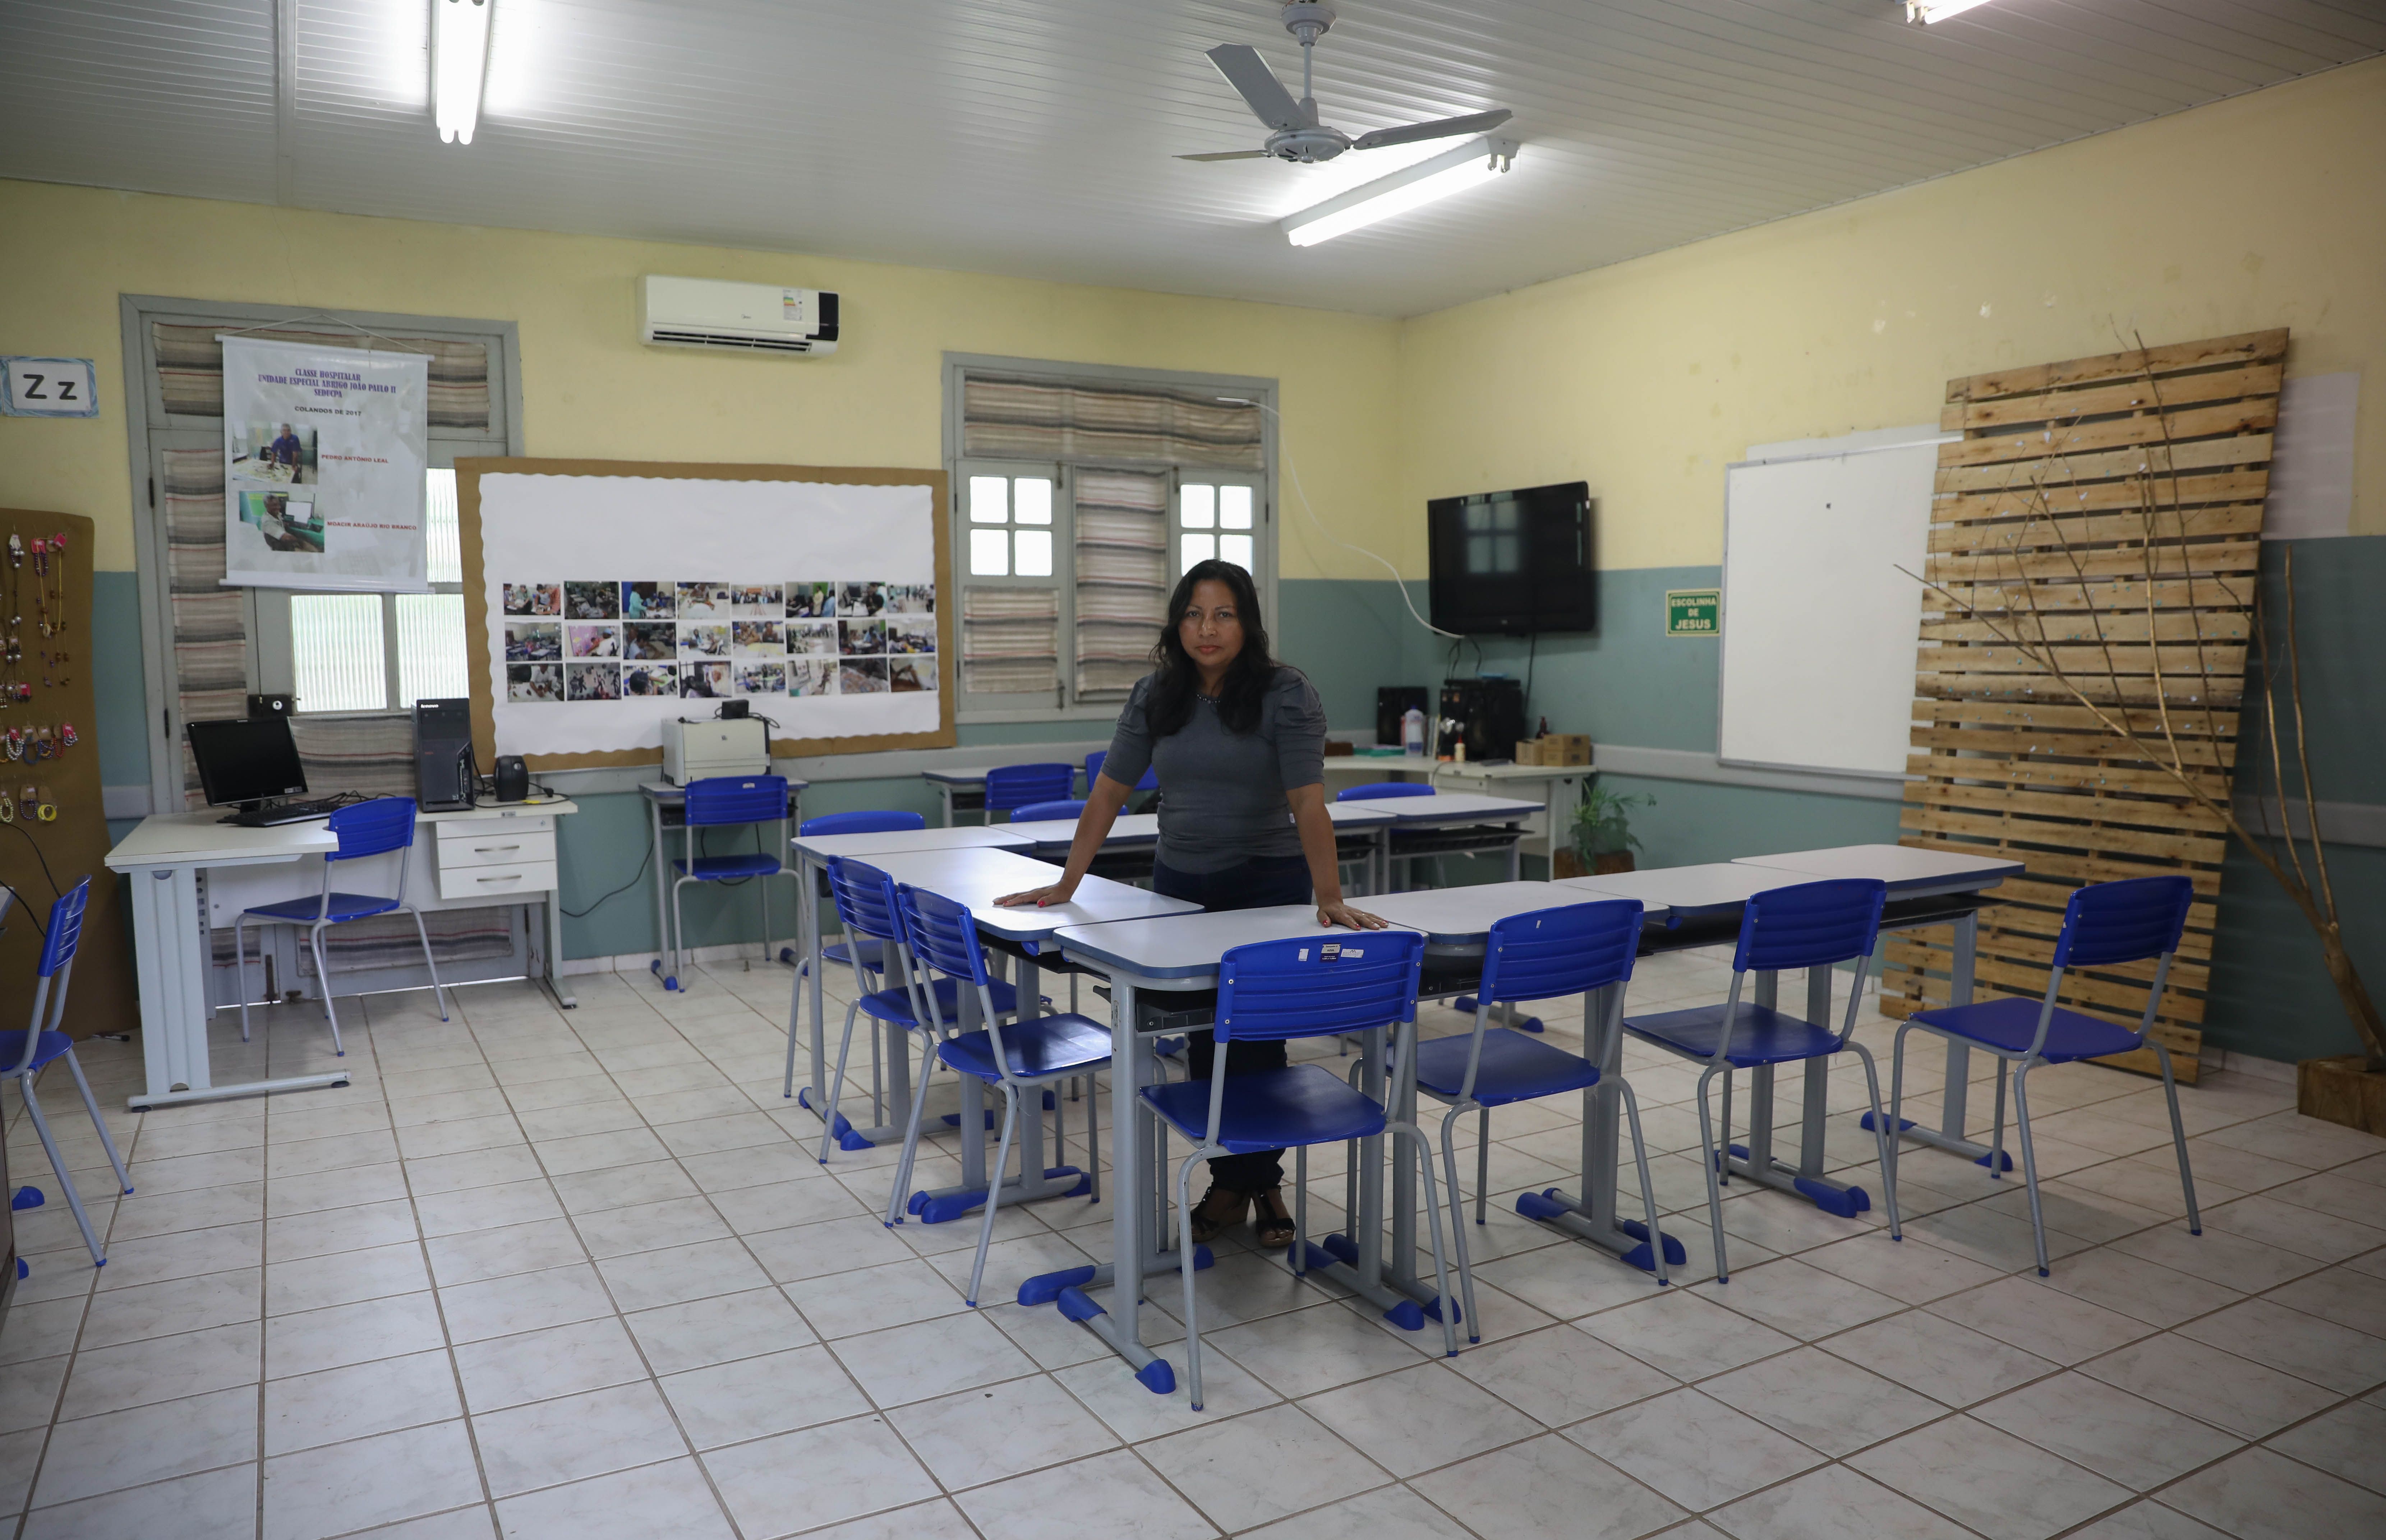 In the midst of summer vacation, Ediana Barbosa stops by her classroom to prepare for the next semester. Image by Anton L. Delgado. Brazil, 2020.